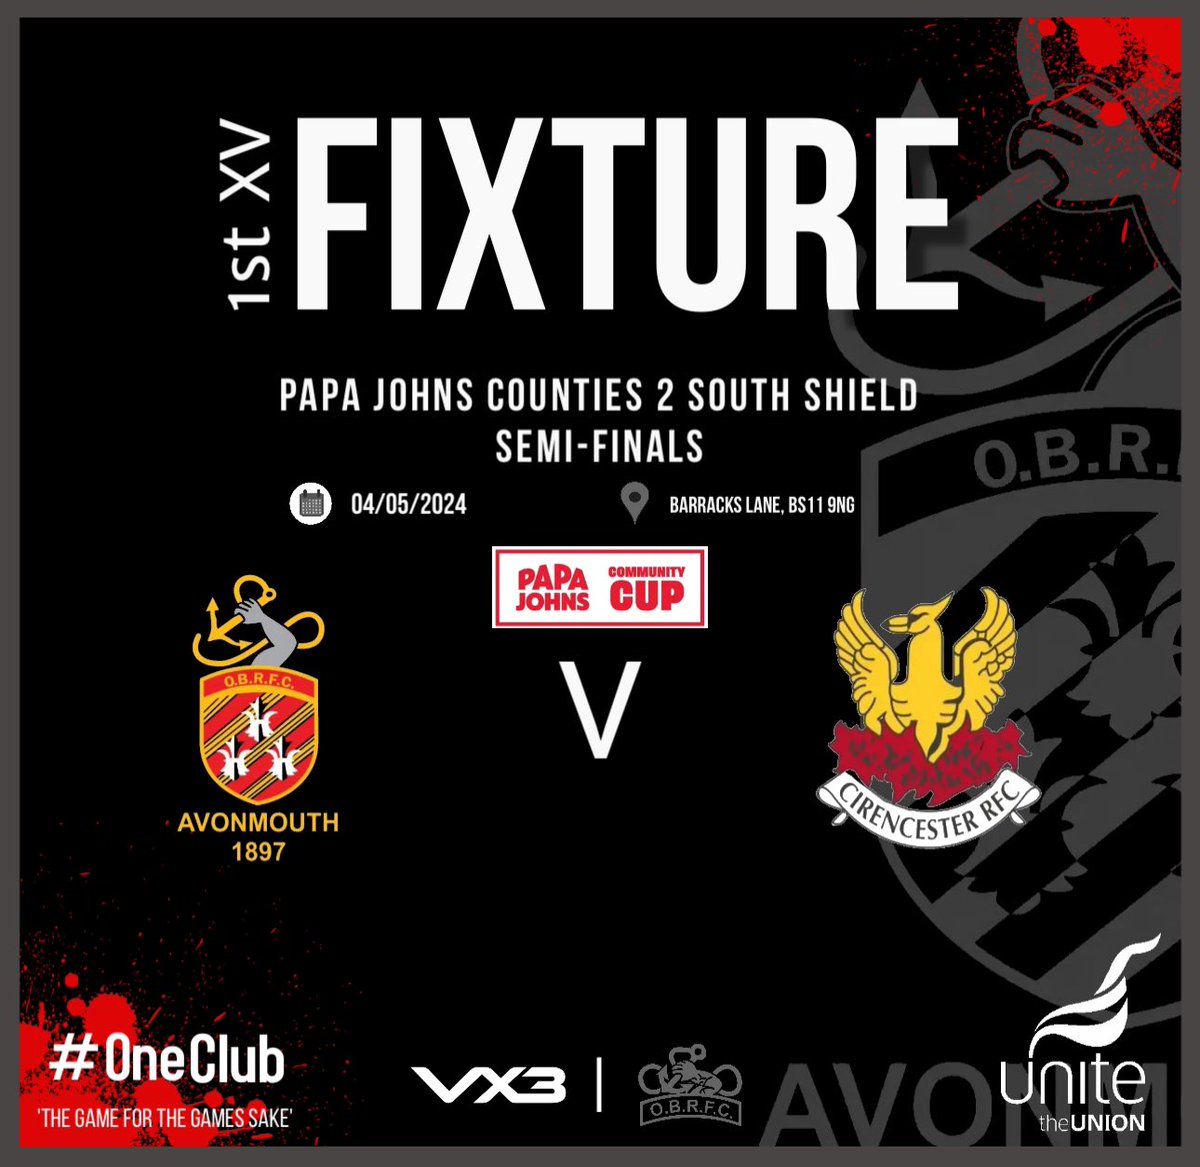 🔊It's Game Day!!!🔊 Avonmouth Old Boys 1st XV Vs @CirencesterRFC (H) 📆 4th May ⏰ KO: 3pm 📍 BS11 9NG 🏆 Papa Johns Community Cup - Counties 2 South Shield ⚫️🔴⚫️ @swsportsnews @GRFUrugby